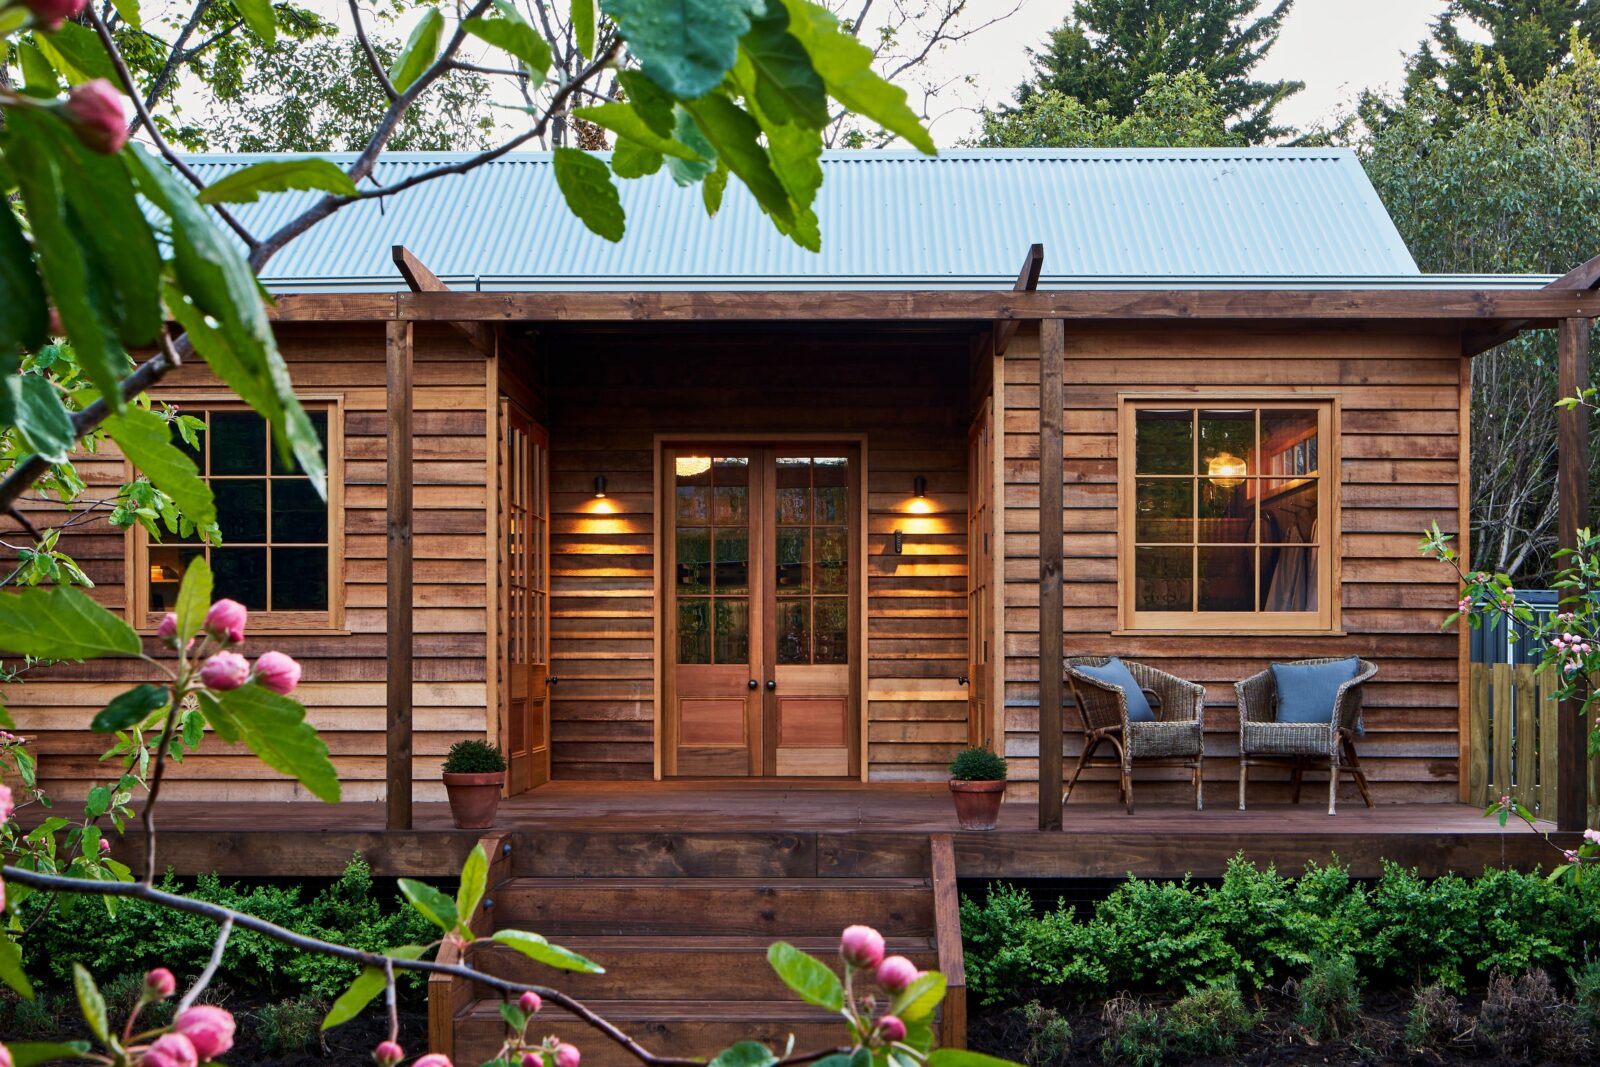 A romantic wooden cottage with retractable veranda roof and movable copper bath